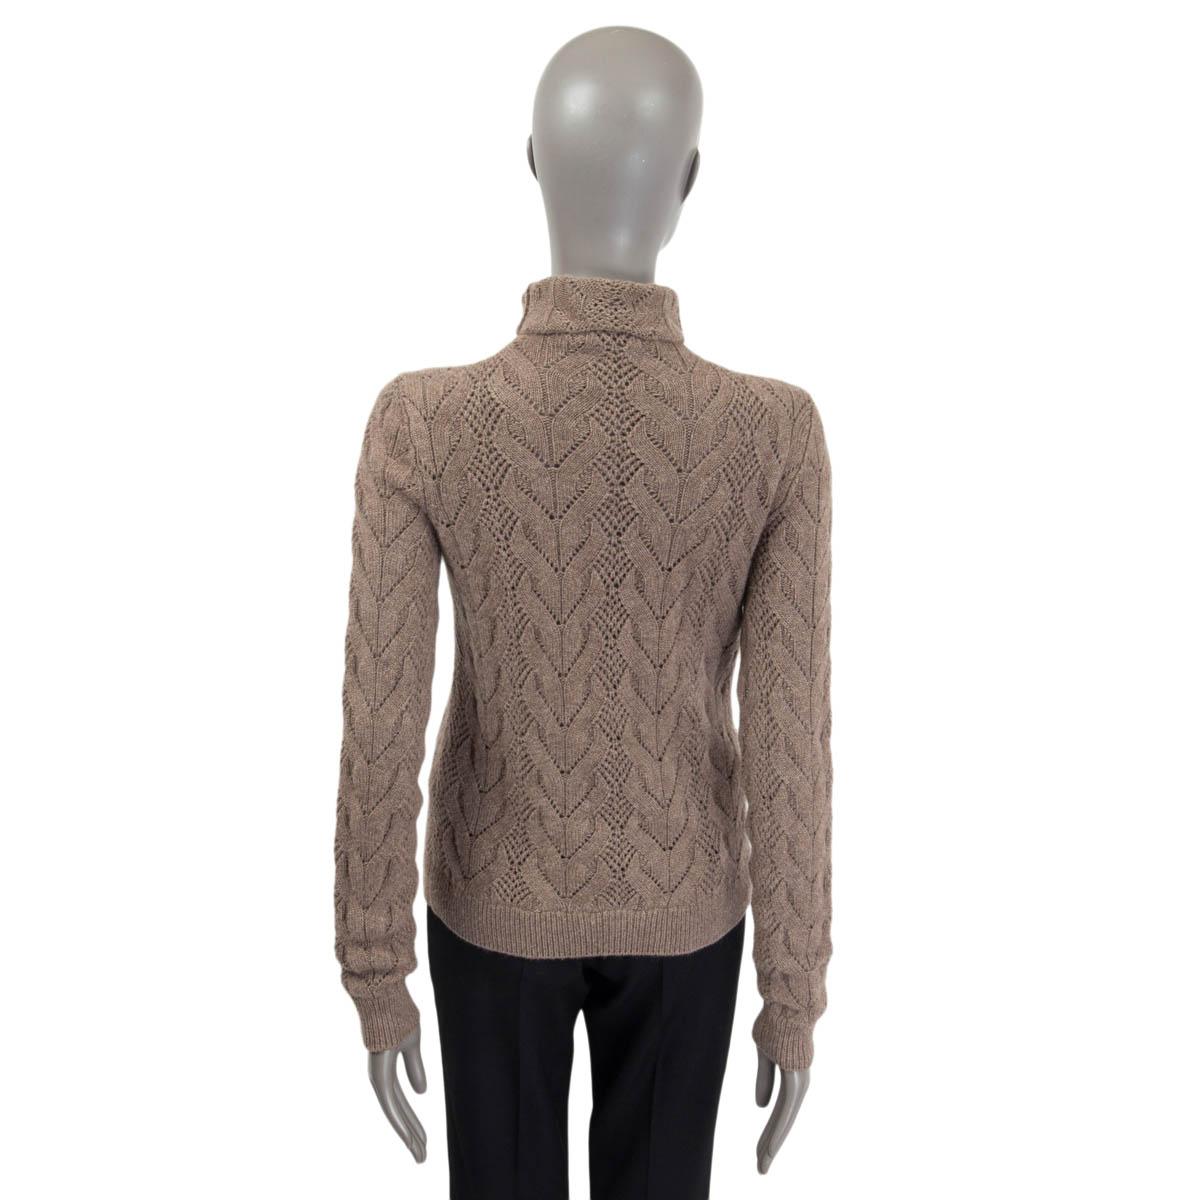 100% authentic Ralph Lauren cable knit sweater in taupe cashmere (100%). Features a high neck and long sleeves. Unlined. Has been worn and is in excellent condition.

Measurements
Tag Size	S
Size	S
Shoulder Width	40cm (15.6in)
Bust	82cm (32in) to